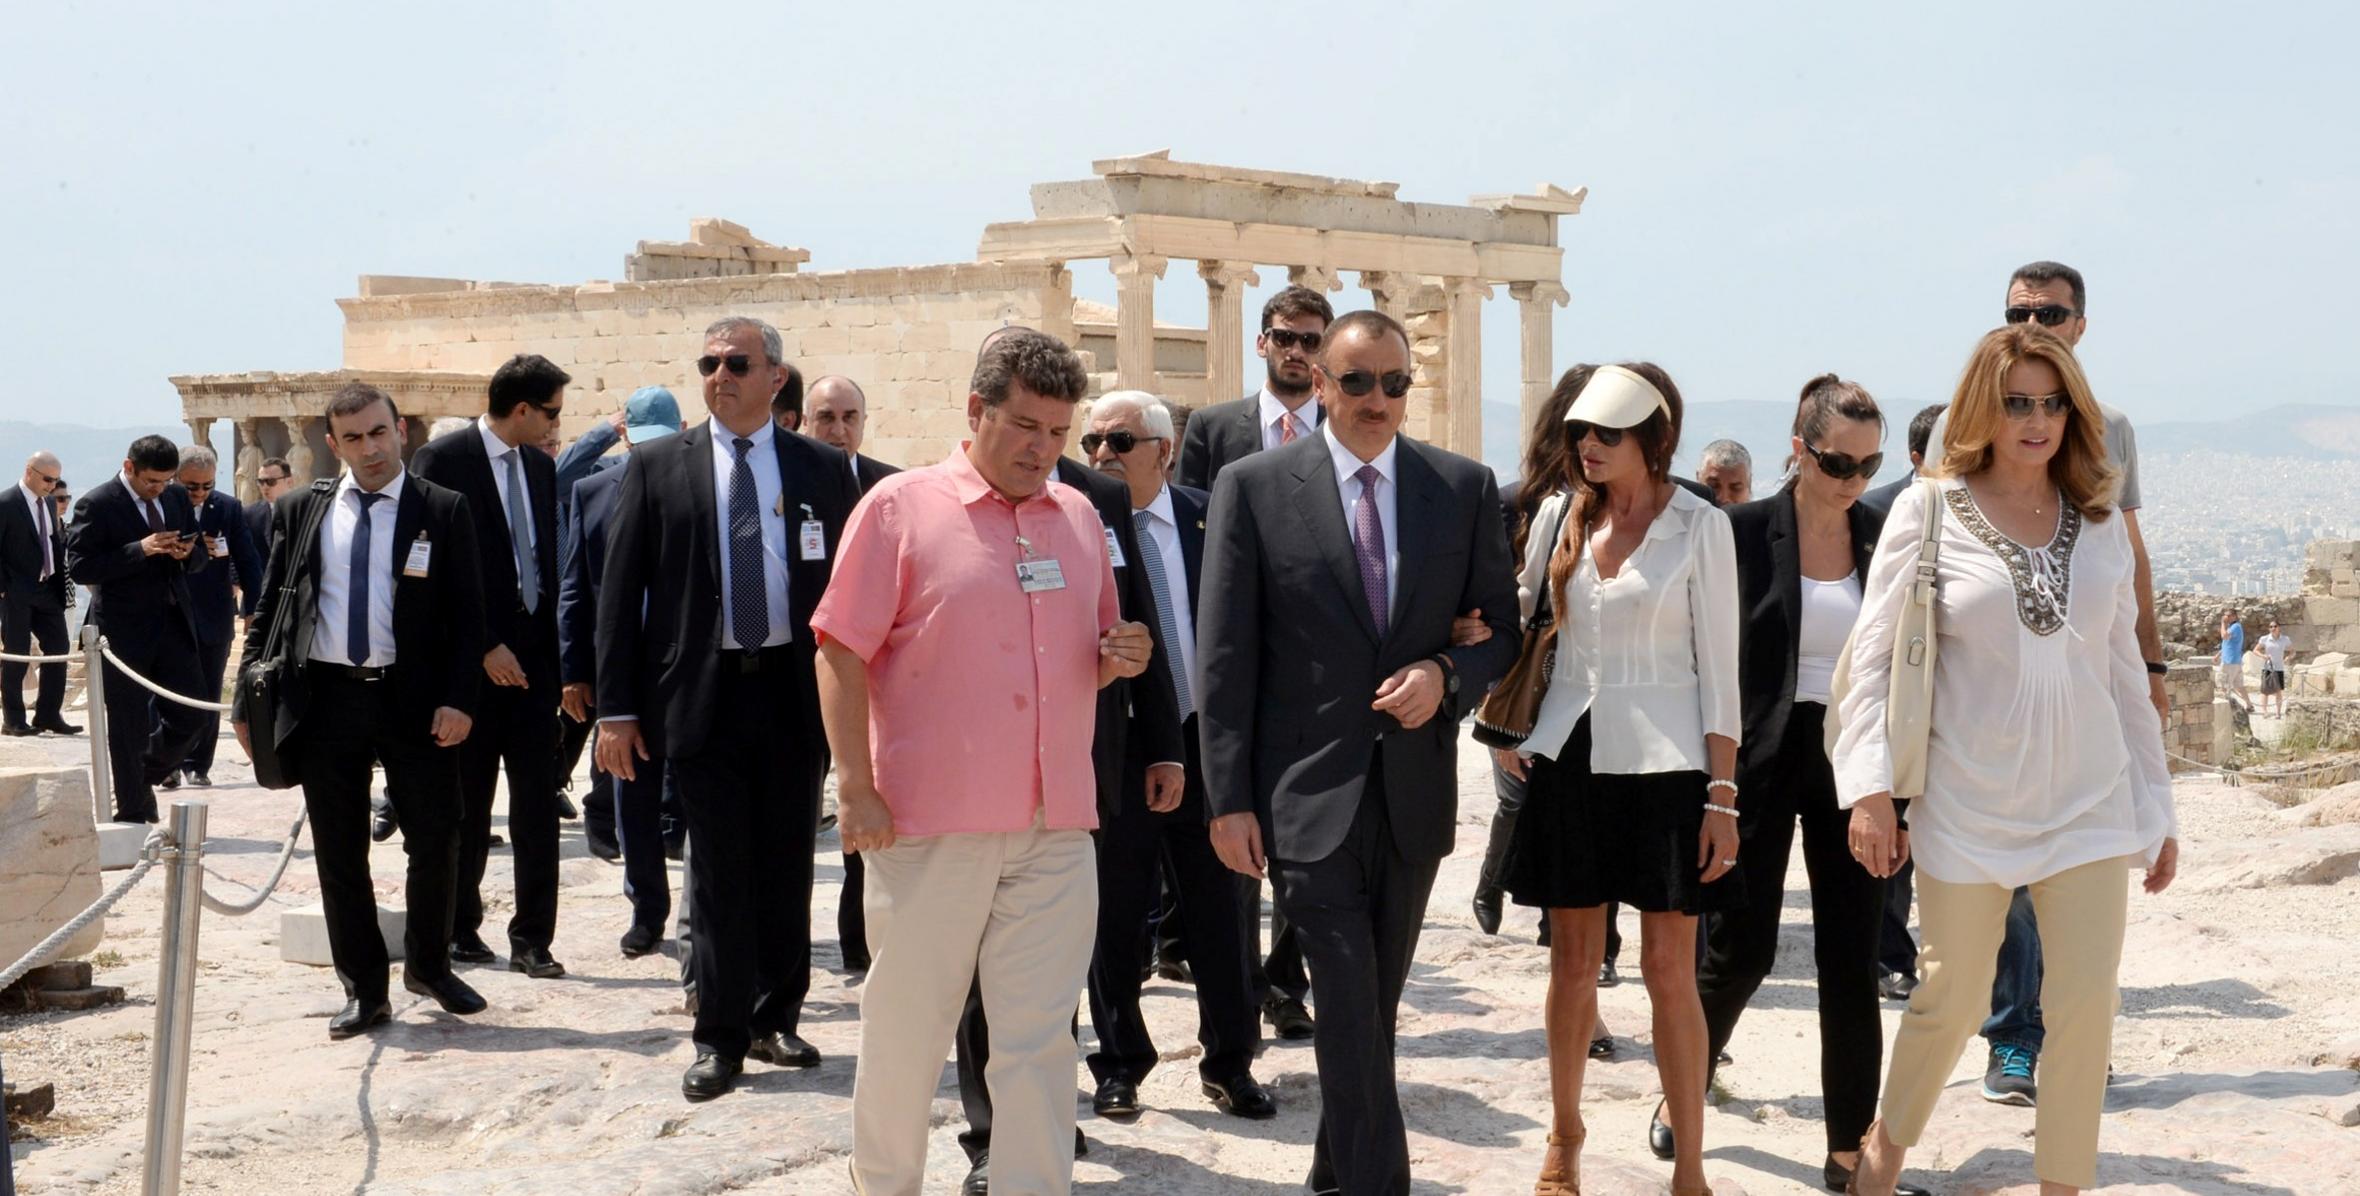 Ilham Aliyev visited the Acropolis of Athens